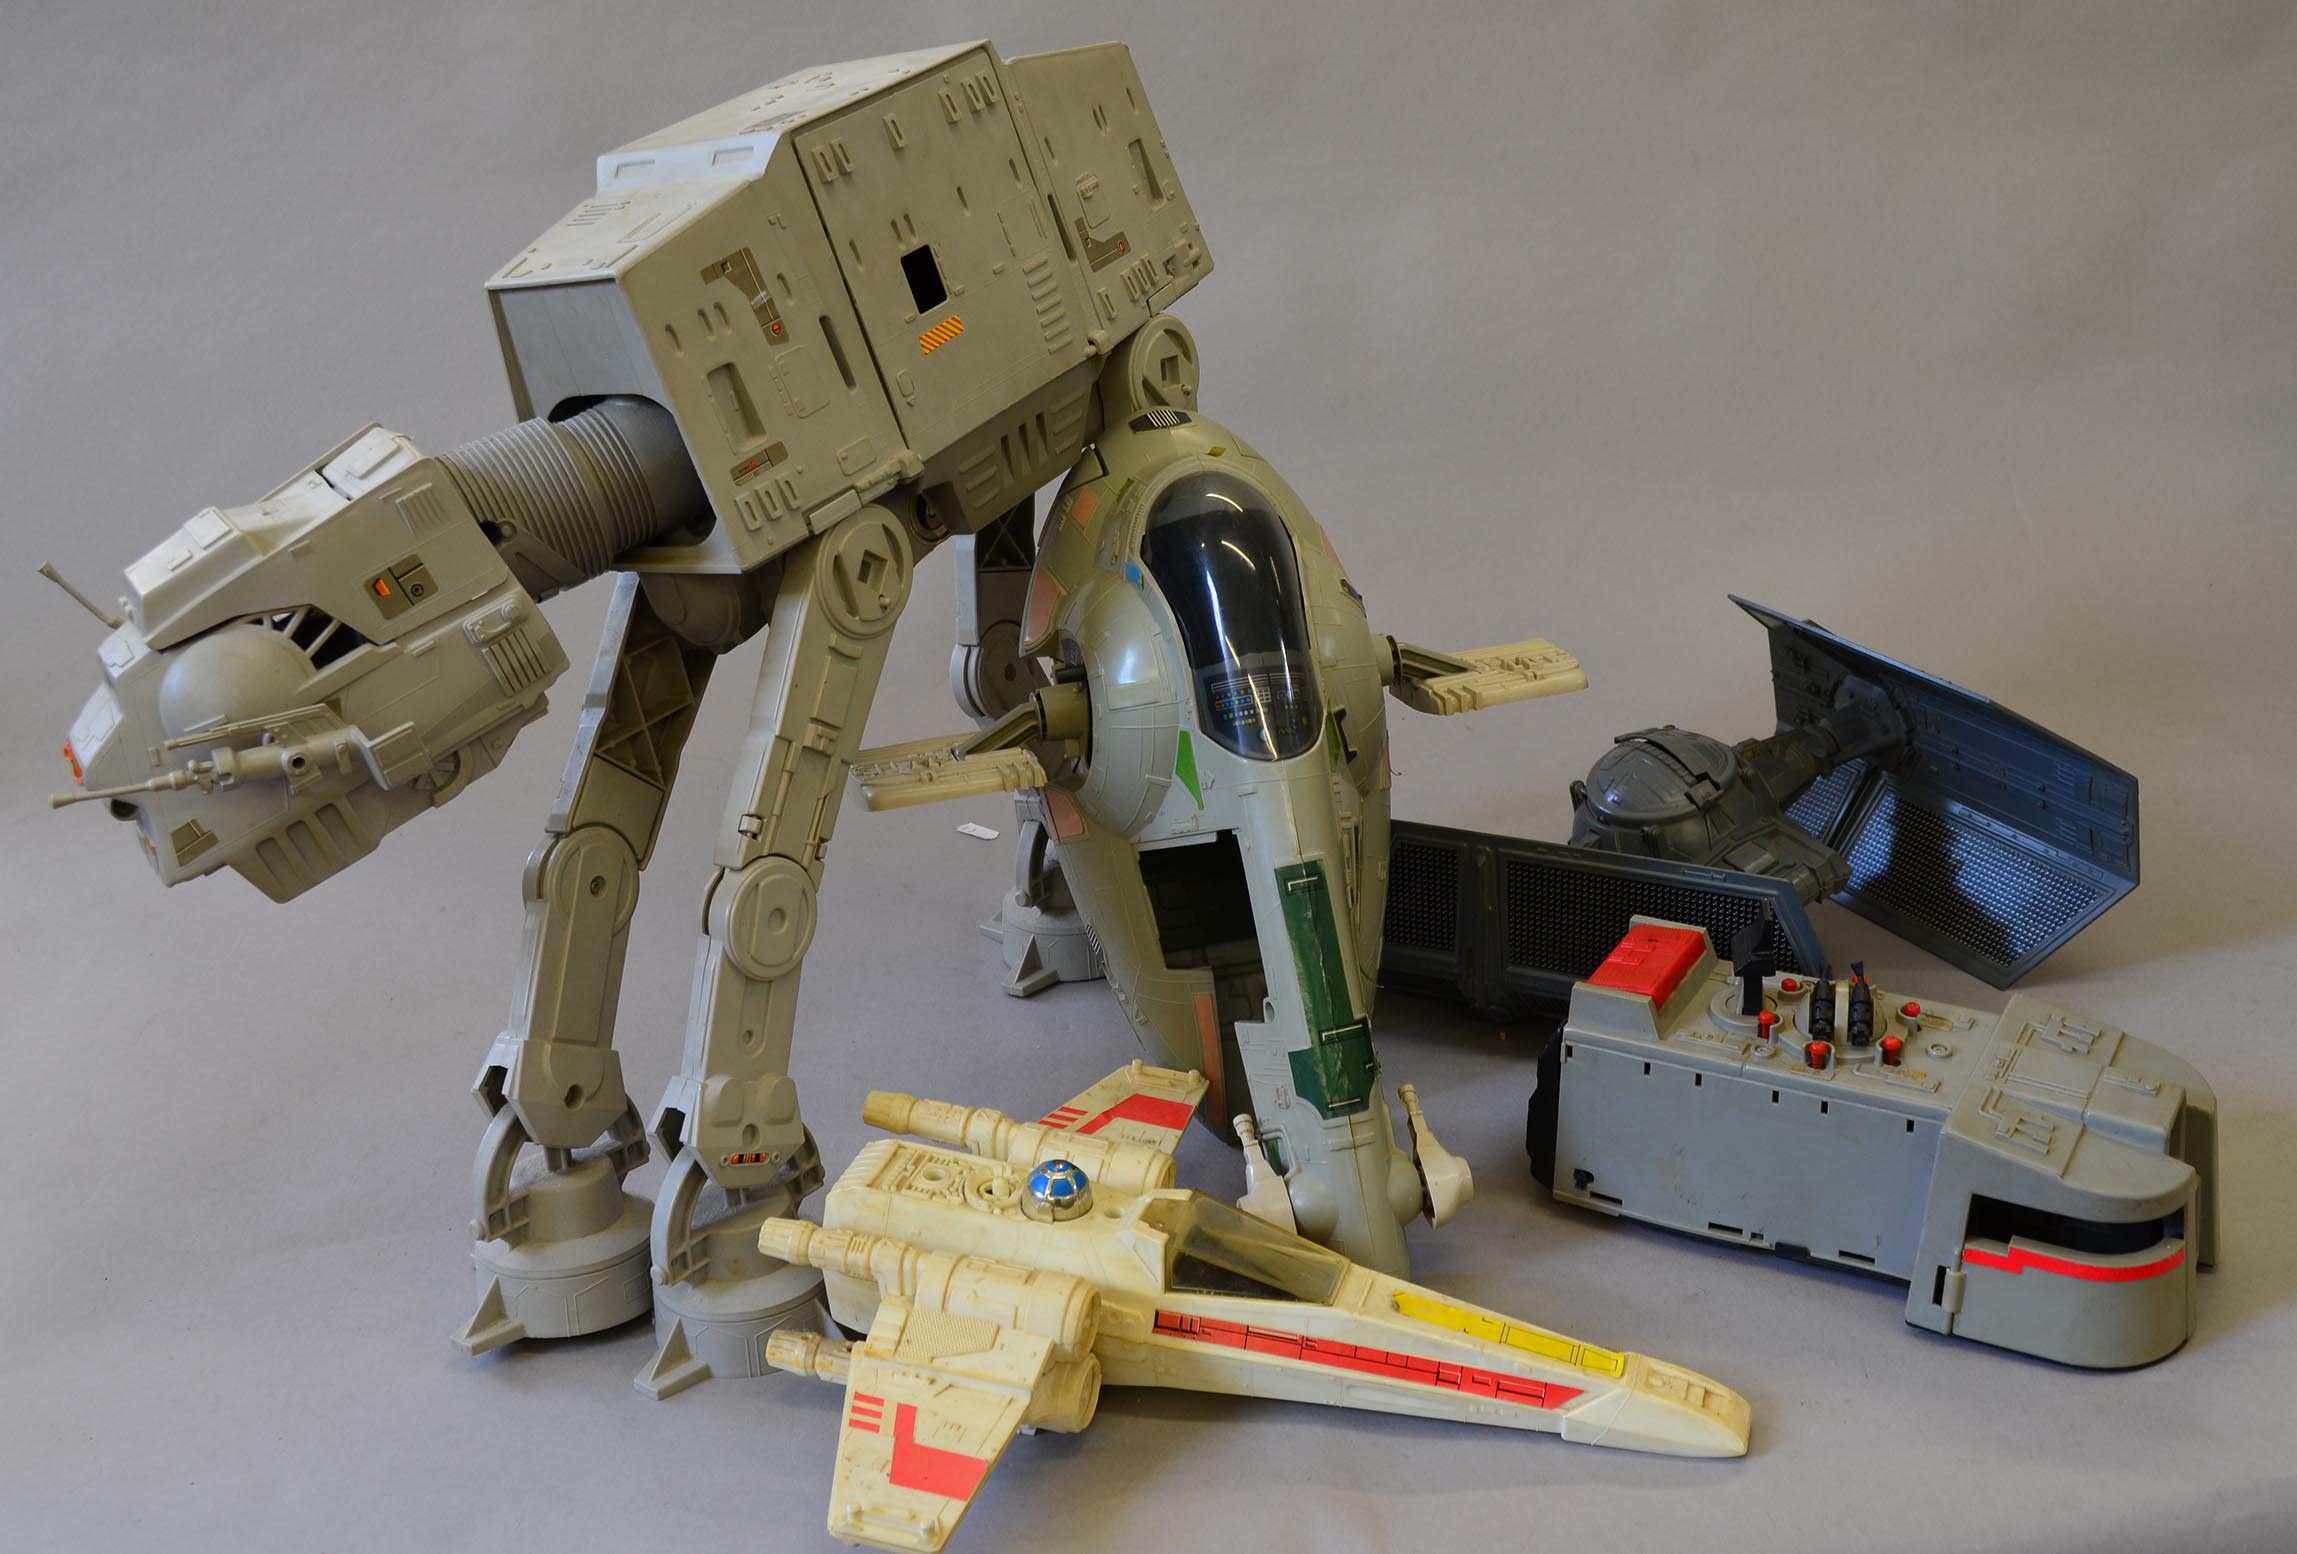 Kenner Star Wars vehicles: Slave I; X-wing; AT-AT; Darth Vader`s TIE Fighter; Imperial Troop